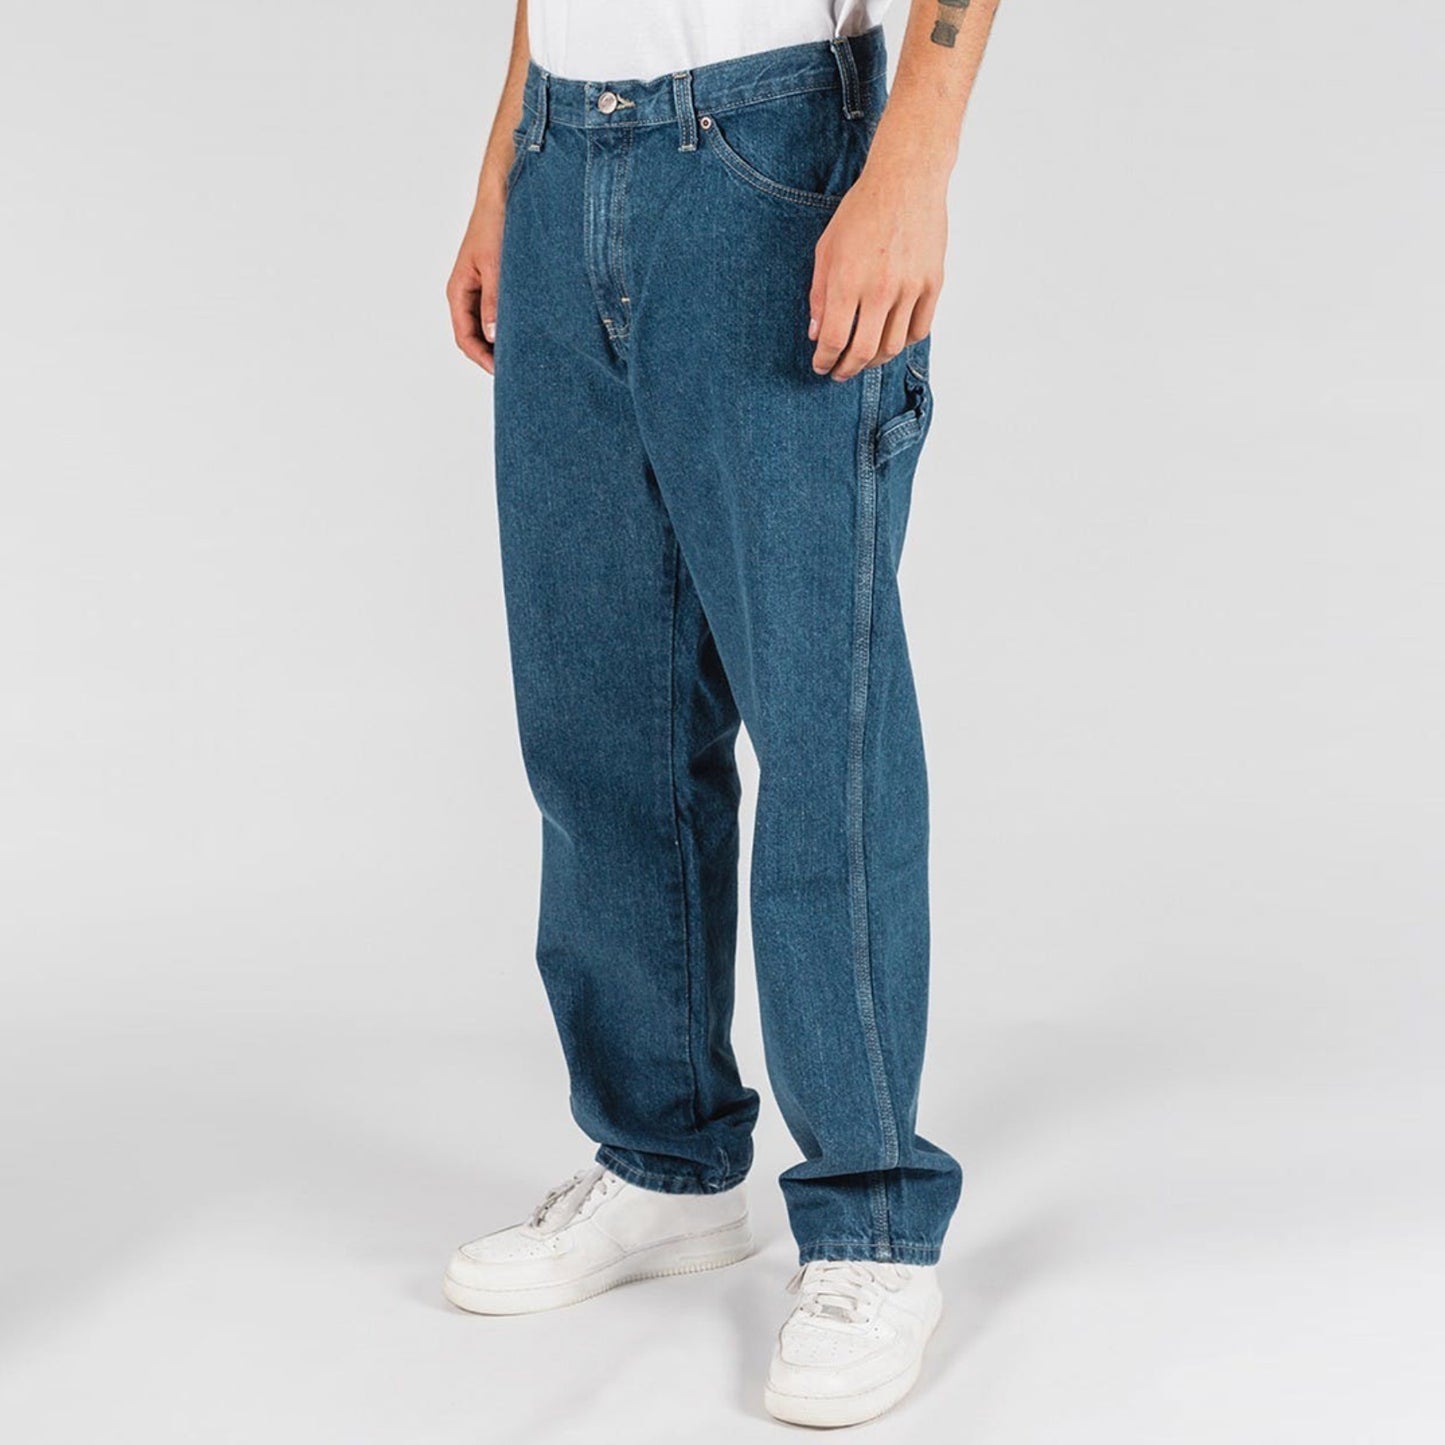 Relaxed Fit Carpenter Jean - Stone Washed Indigo